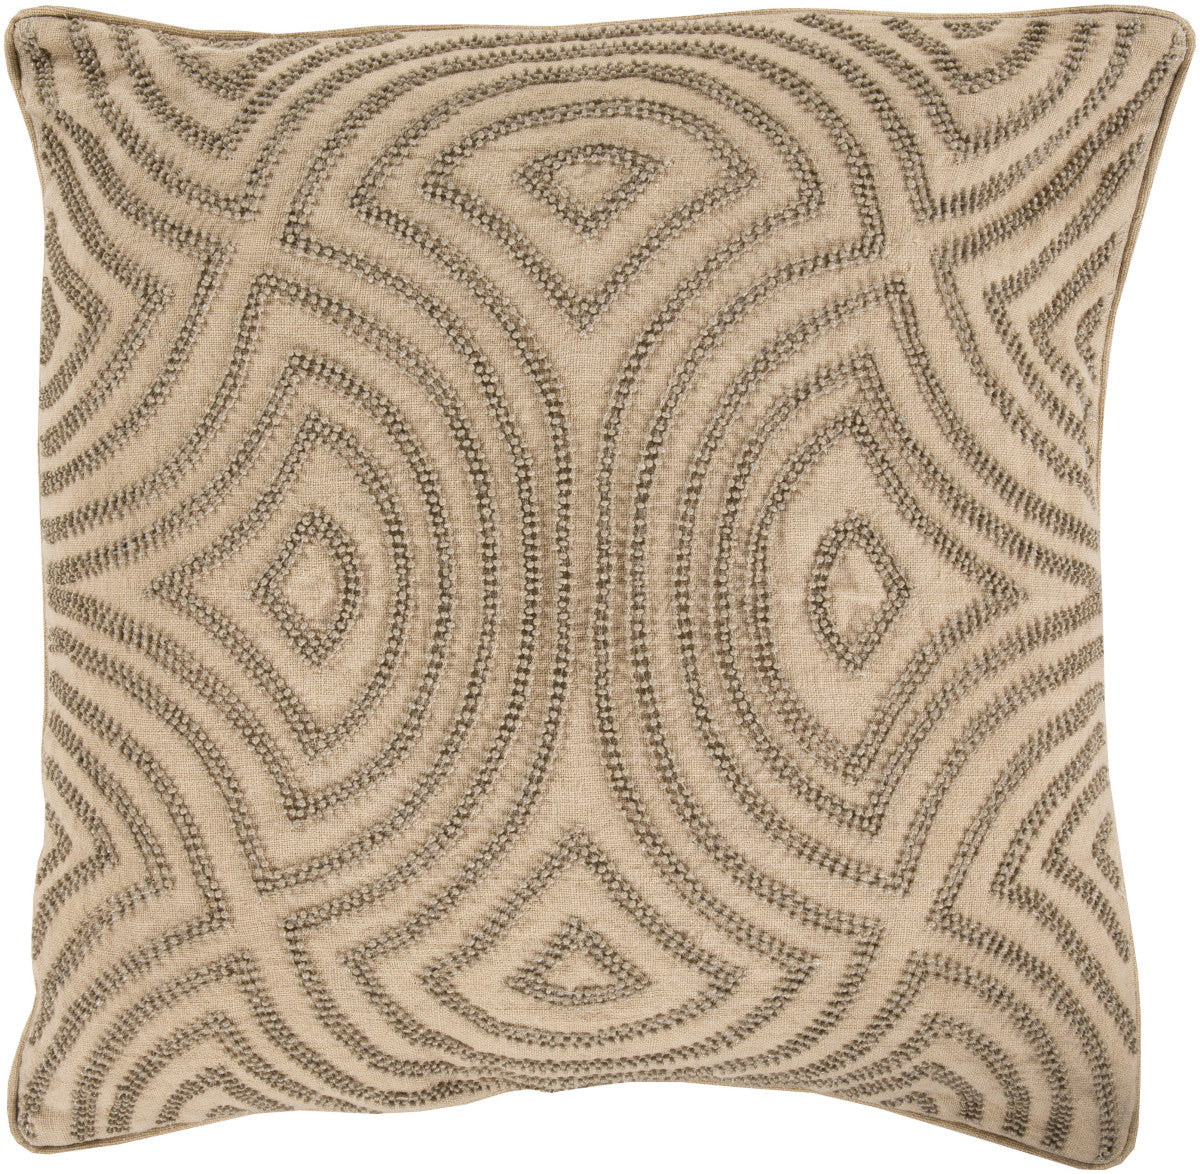 Surya Skinny Dip Linen and Beads SKD-002 Pillow by Candice Olson